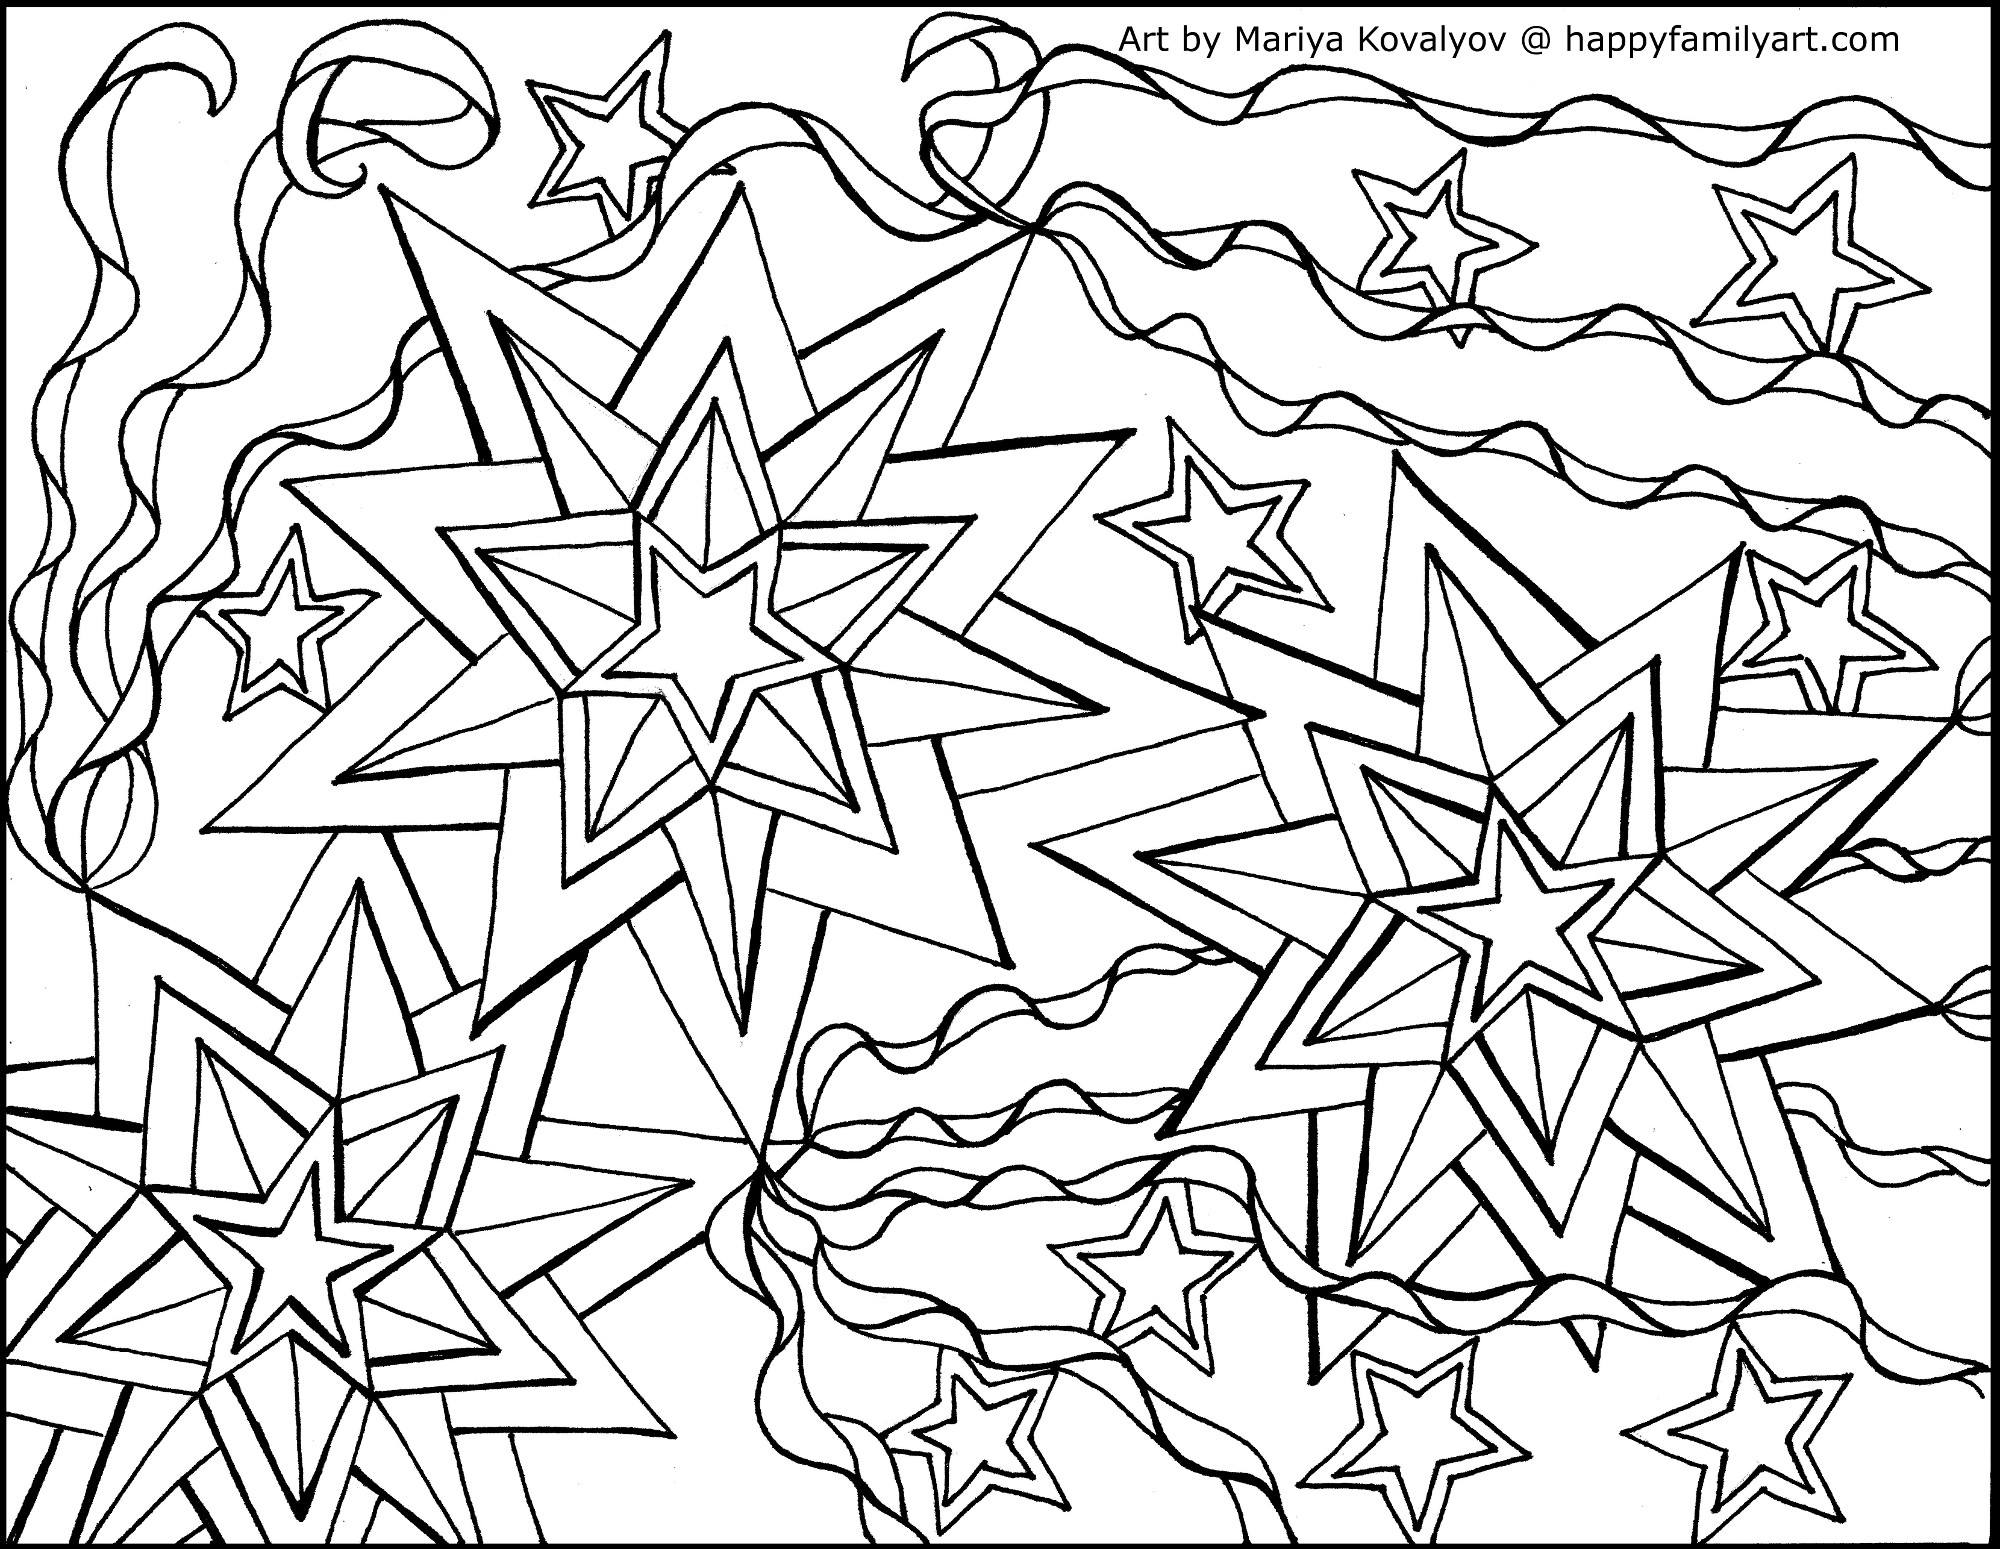 happy family art original and fun coloring pages